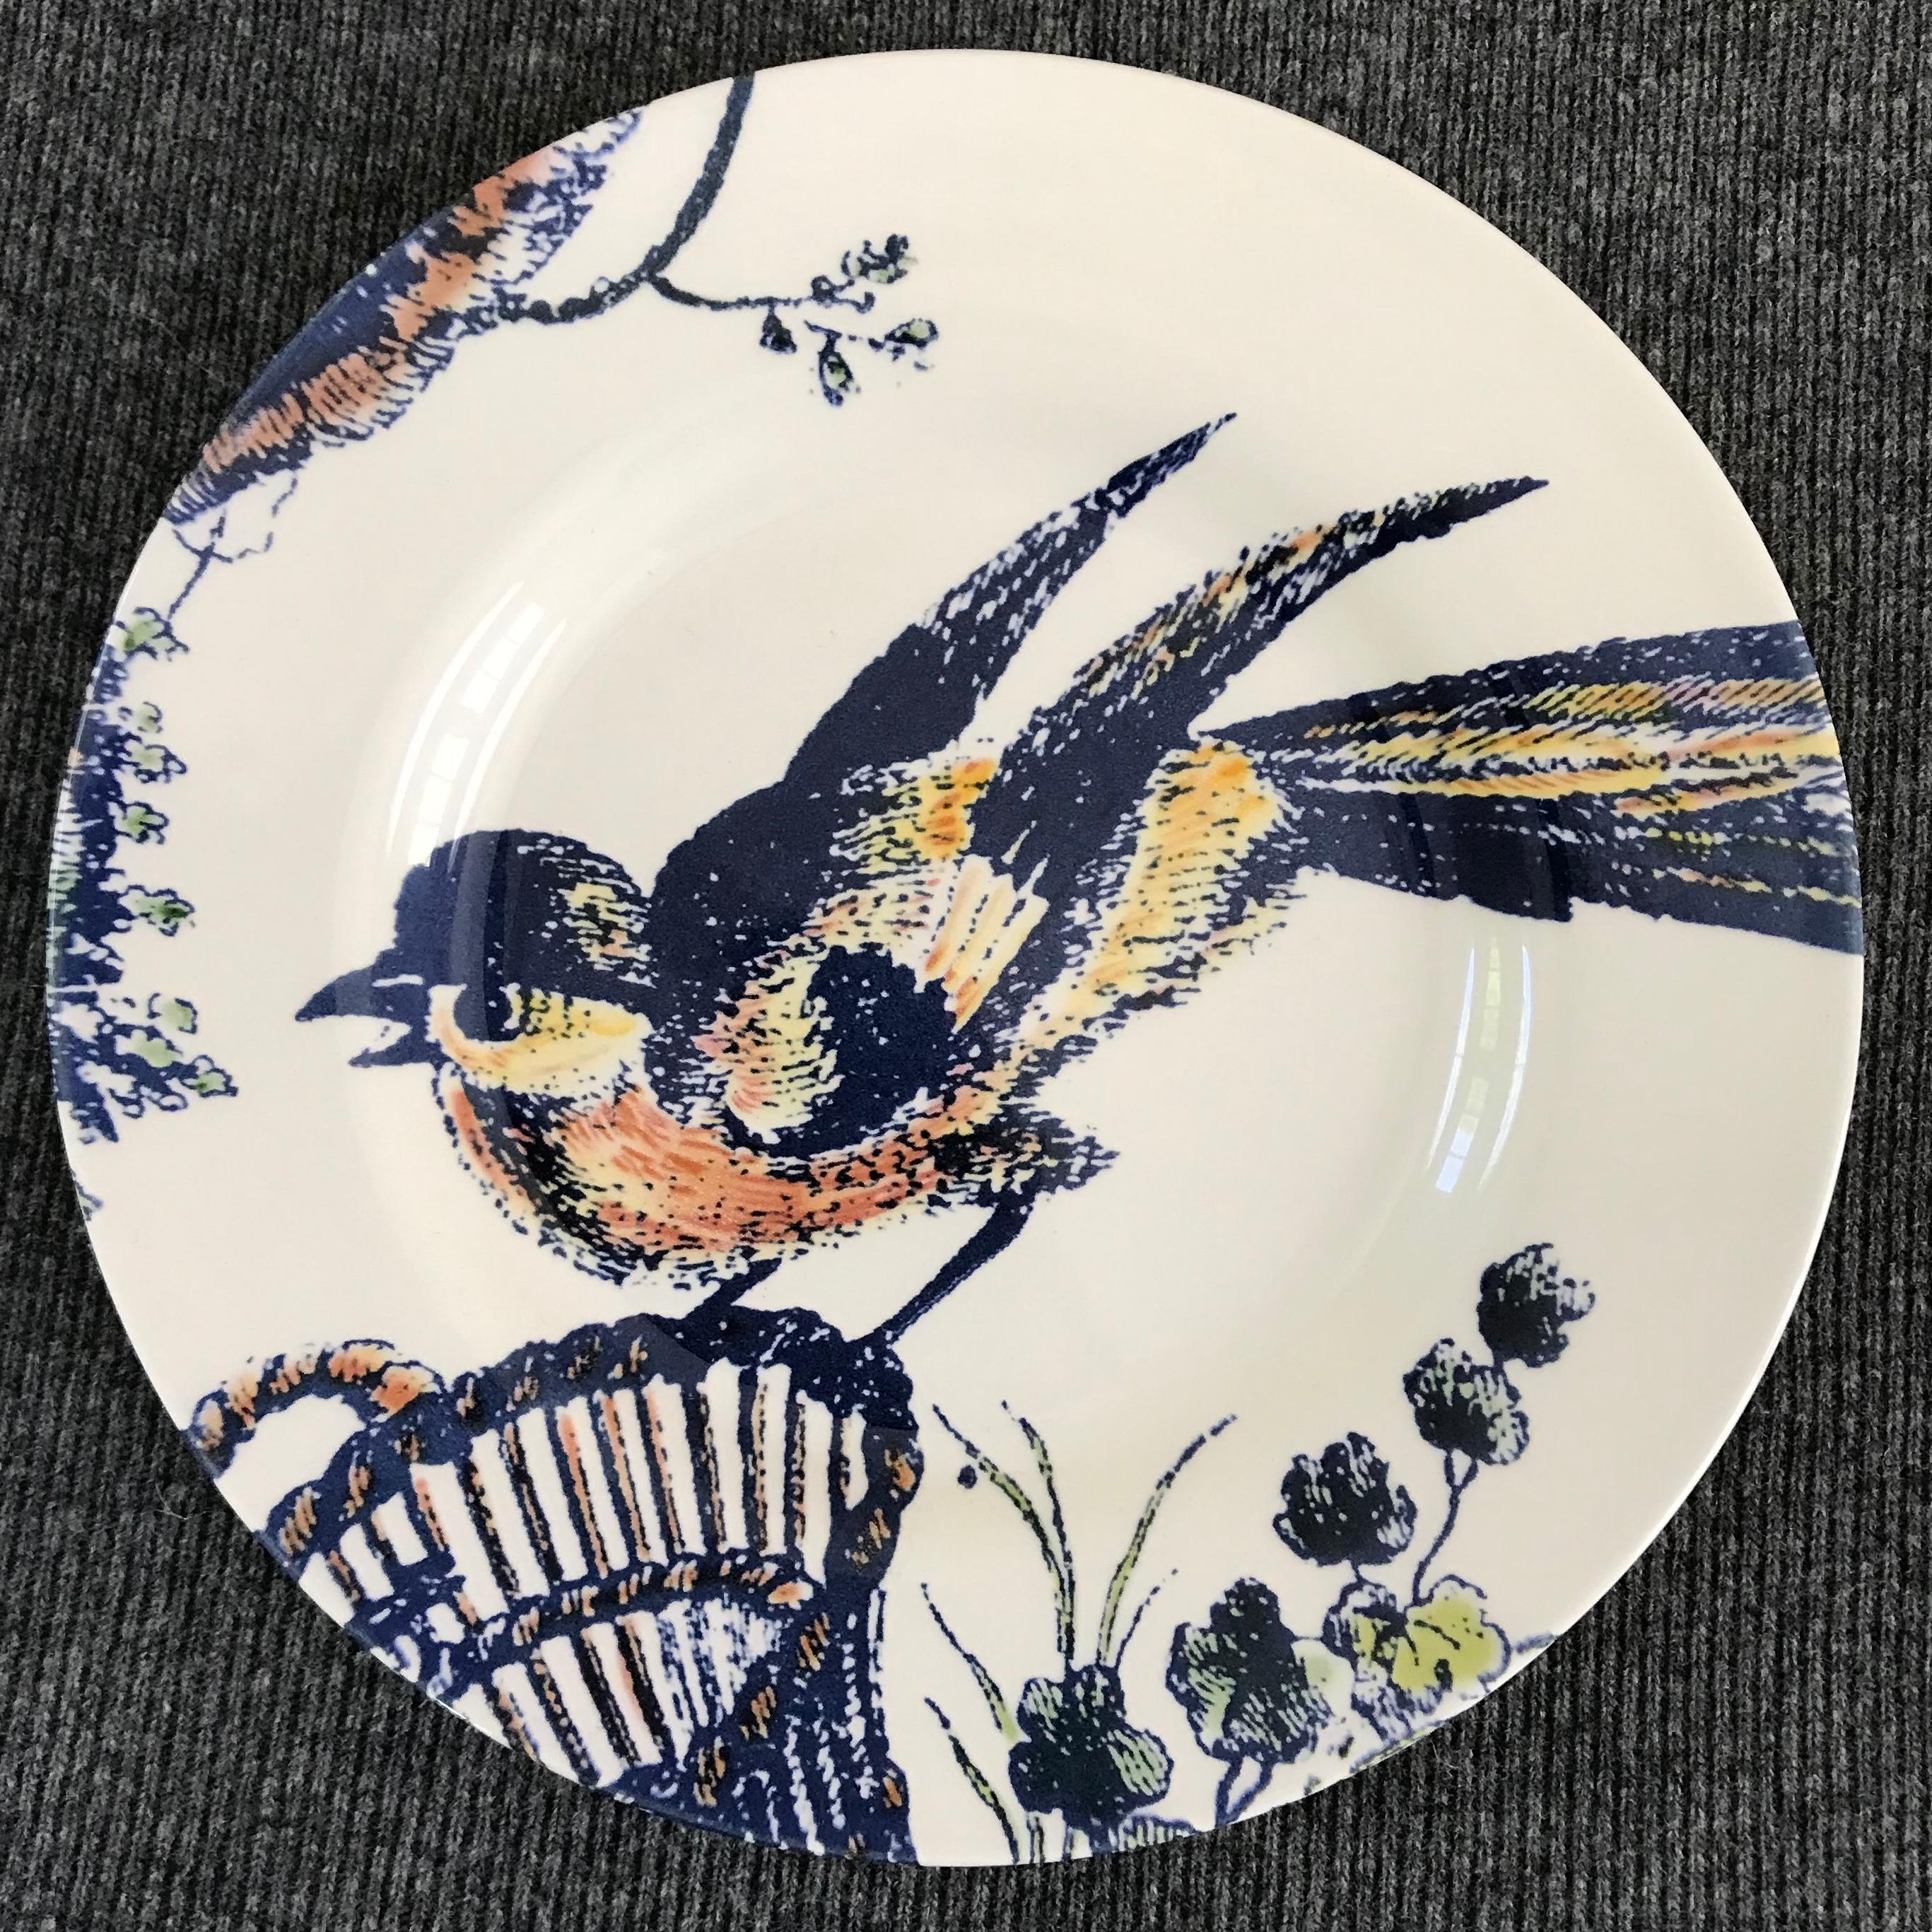 Set of four blue and white bird plates. Four contemporary coloured bird dishes featuring a loon, a rooster, a swan and a kinglet In blues, yellows and peach; a charming avian lunch plate set of four for use or display. Markings for Royal Stafford.